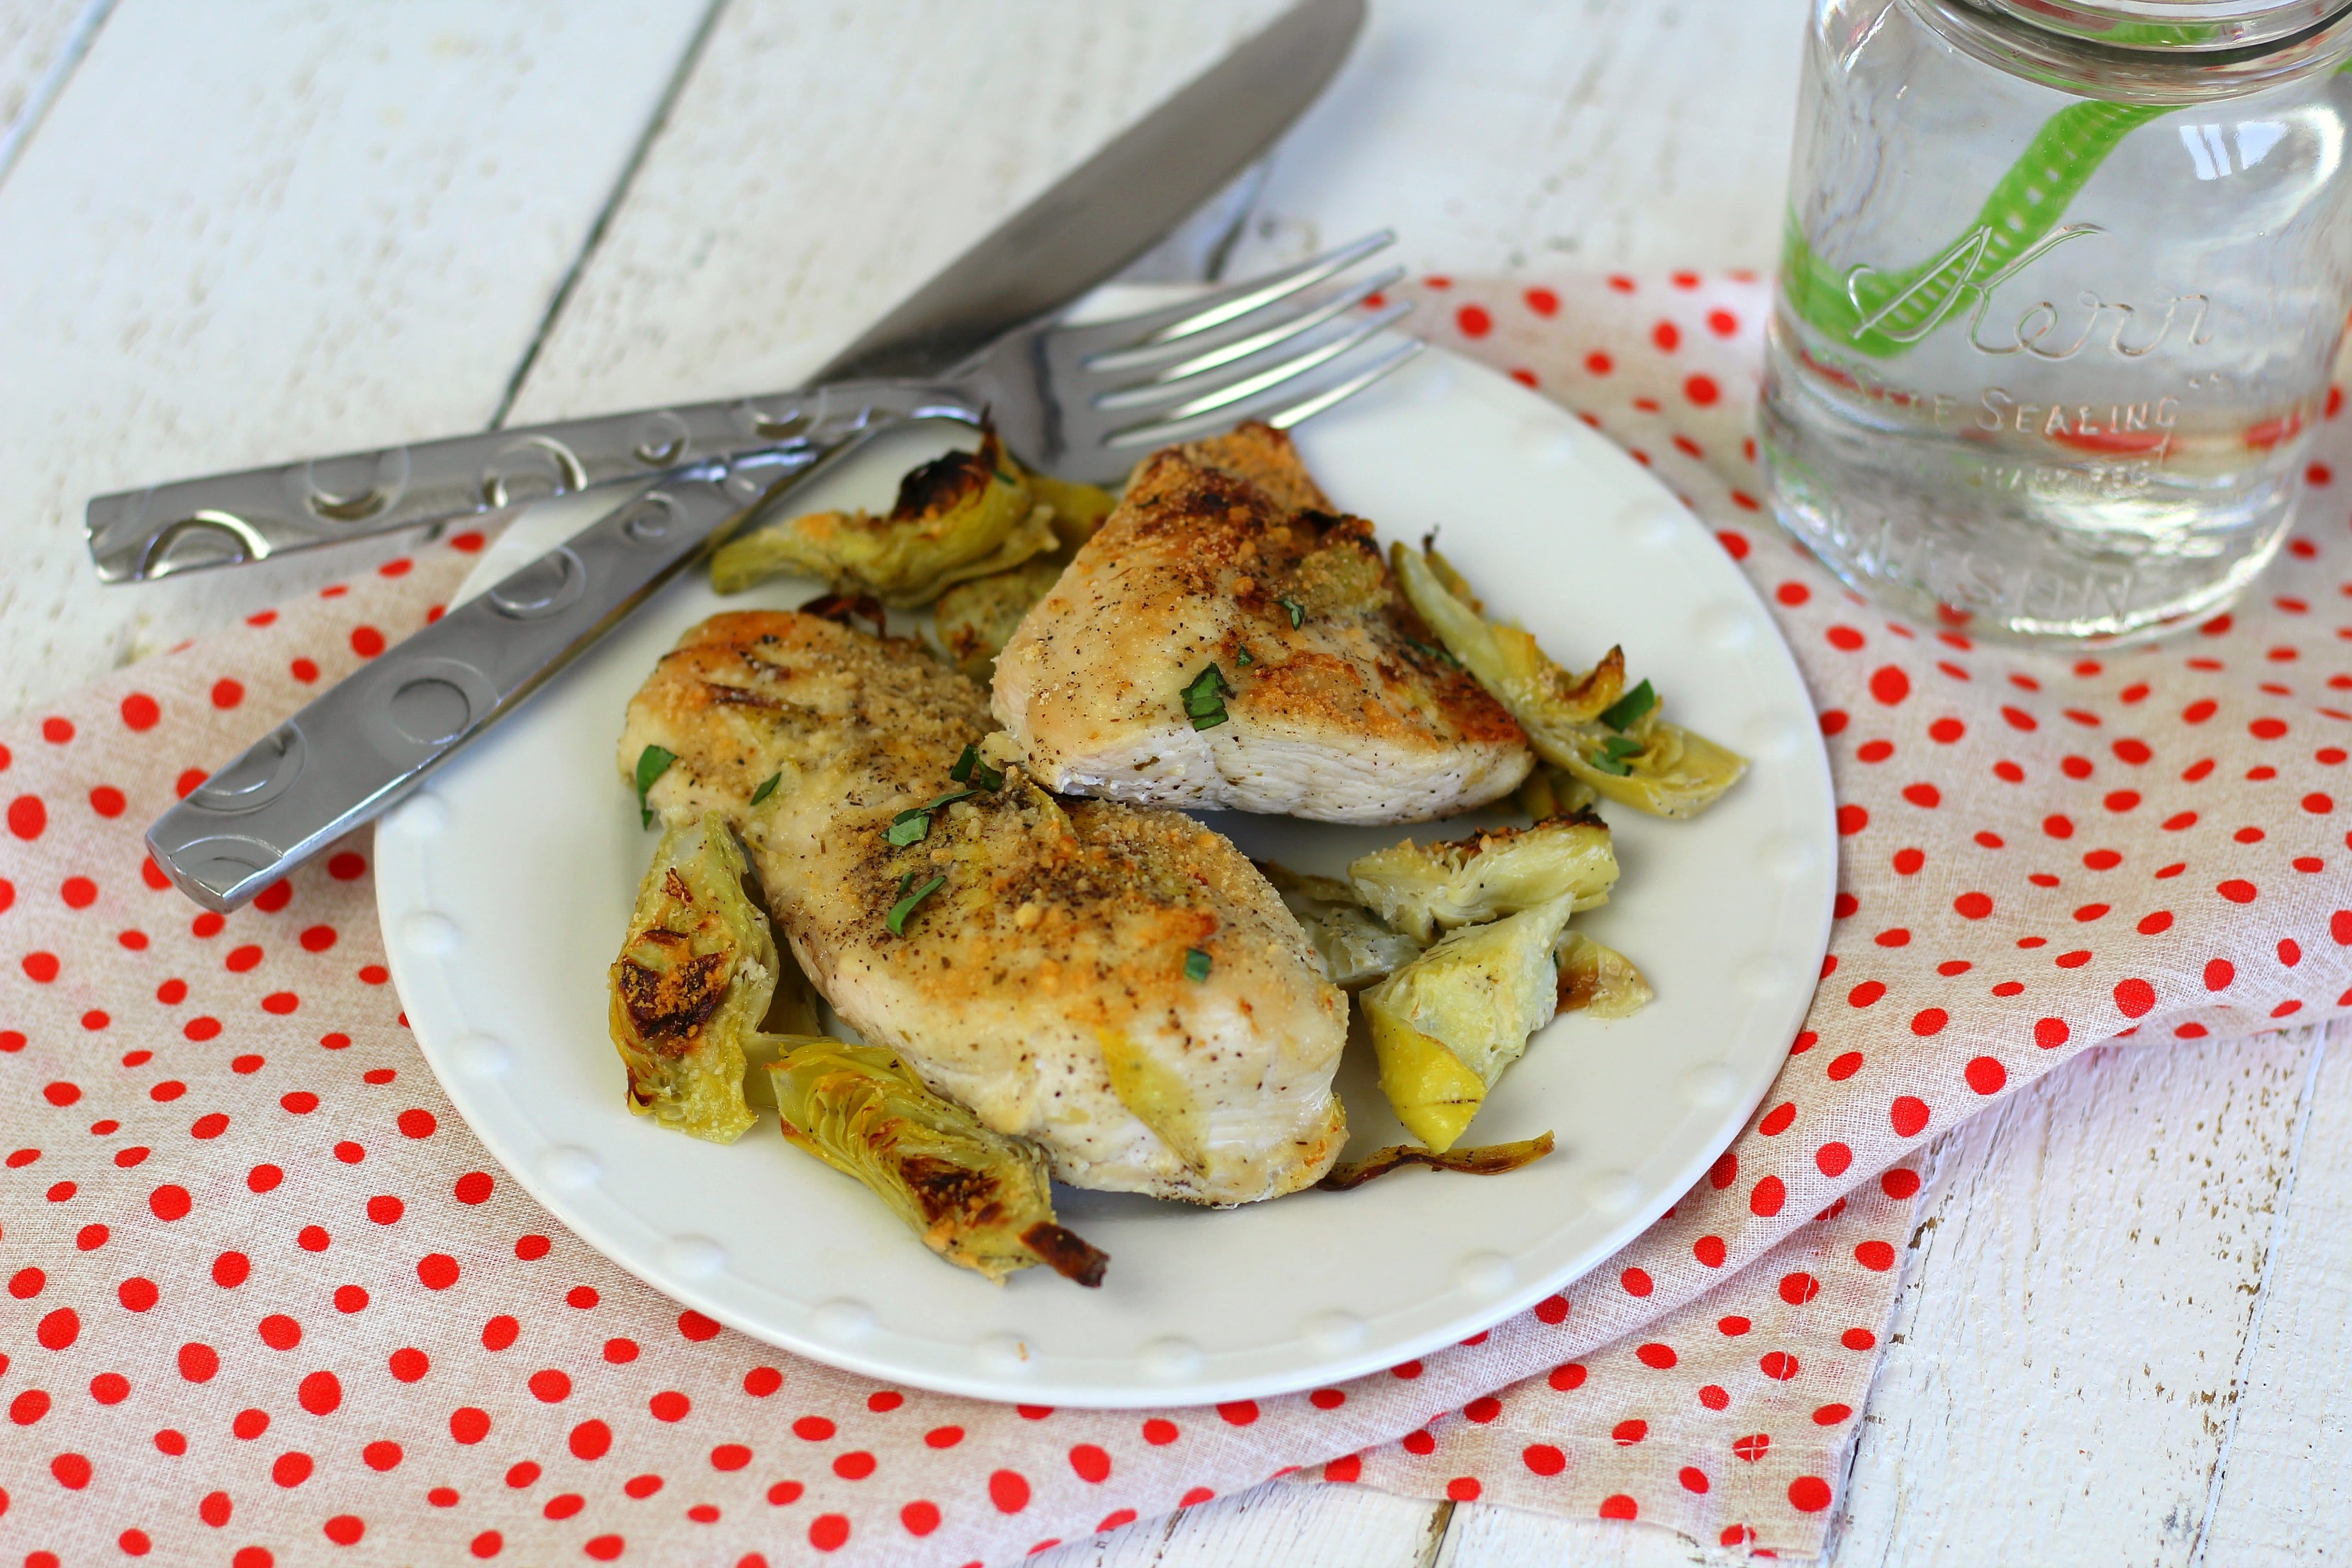 This easy one-pan chicken and artichokes recipe is an easy weeknight dinner